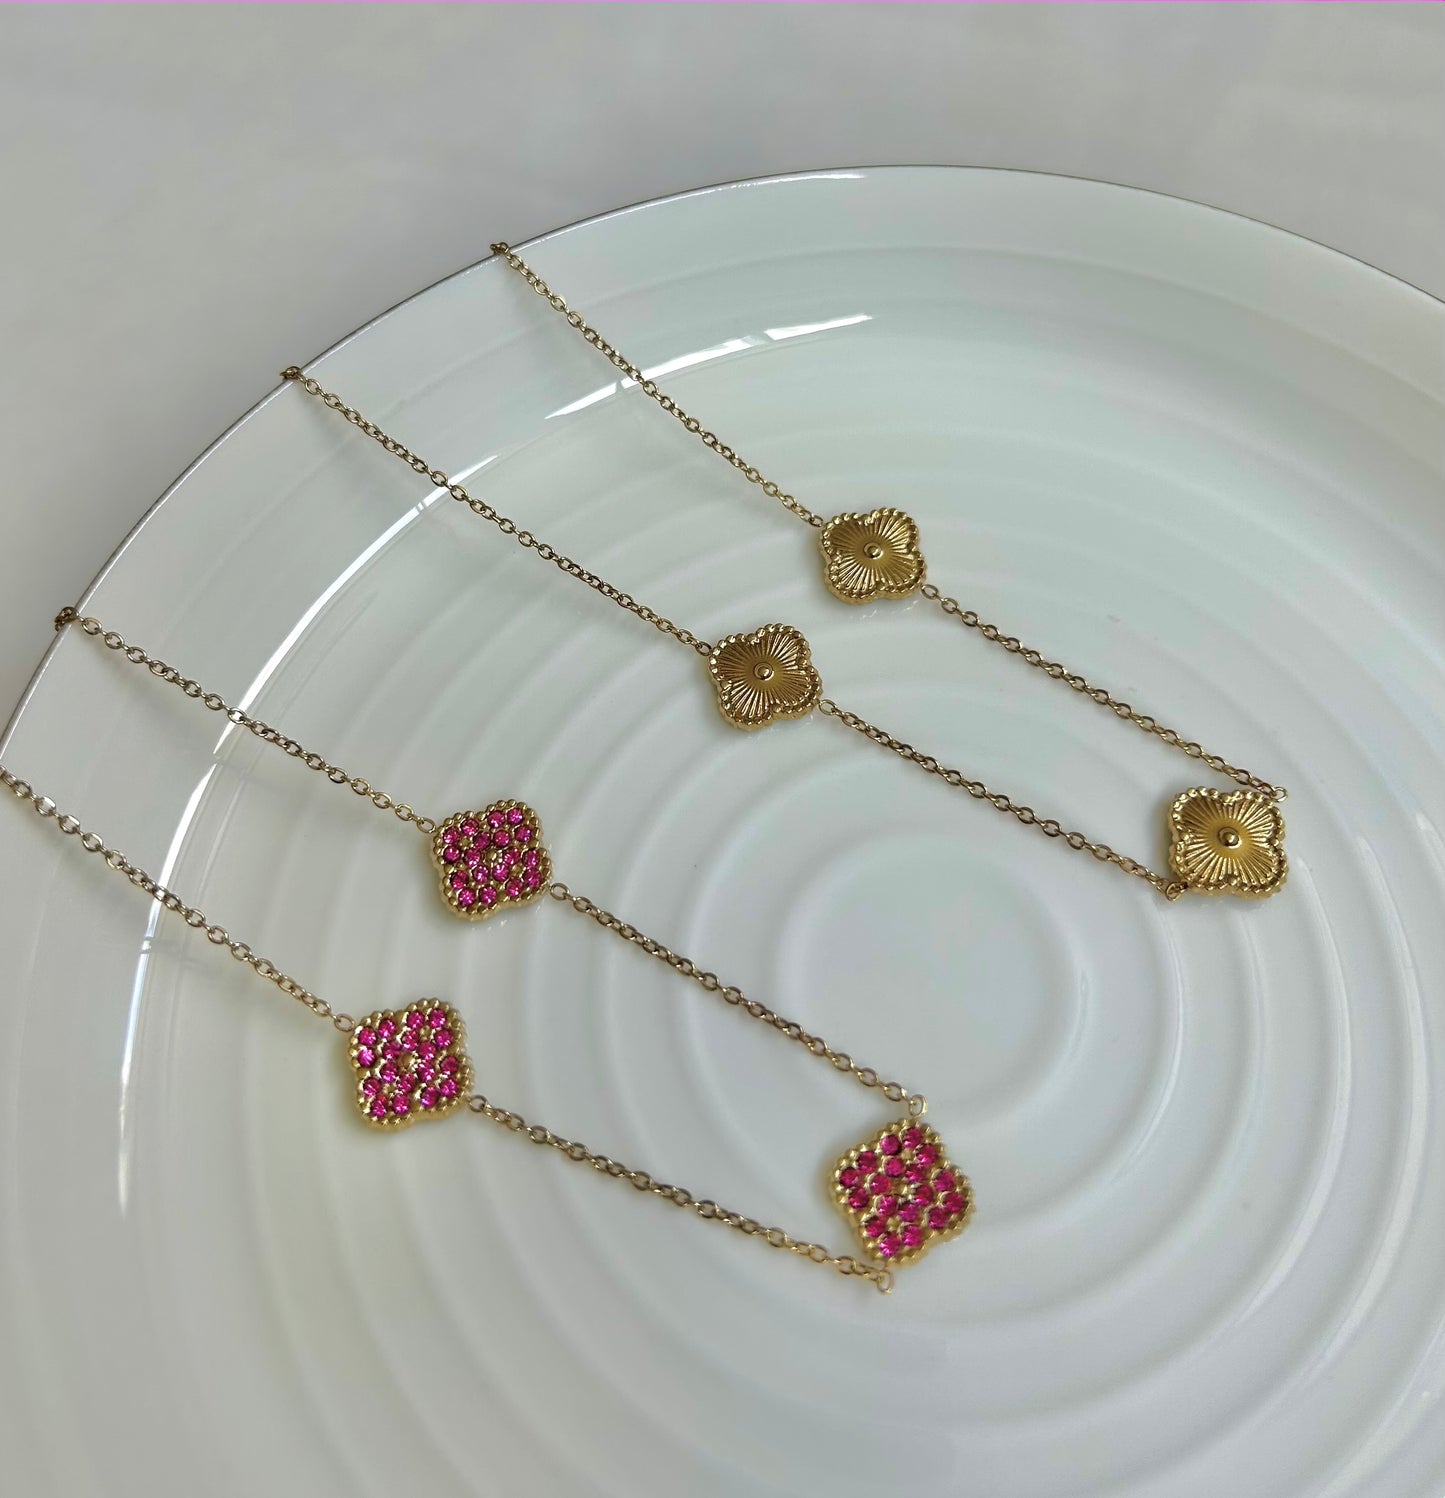 Reversible Clover Necklace Pink